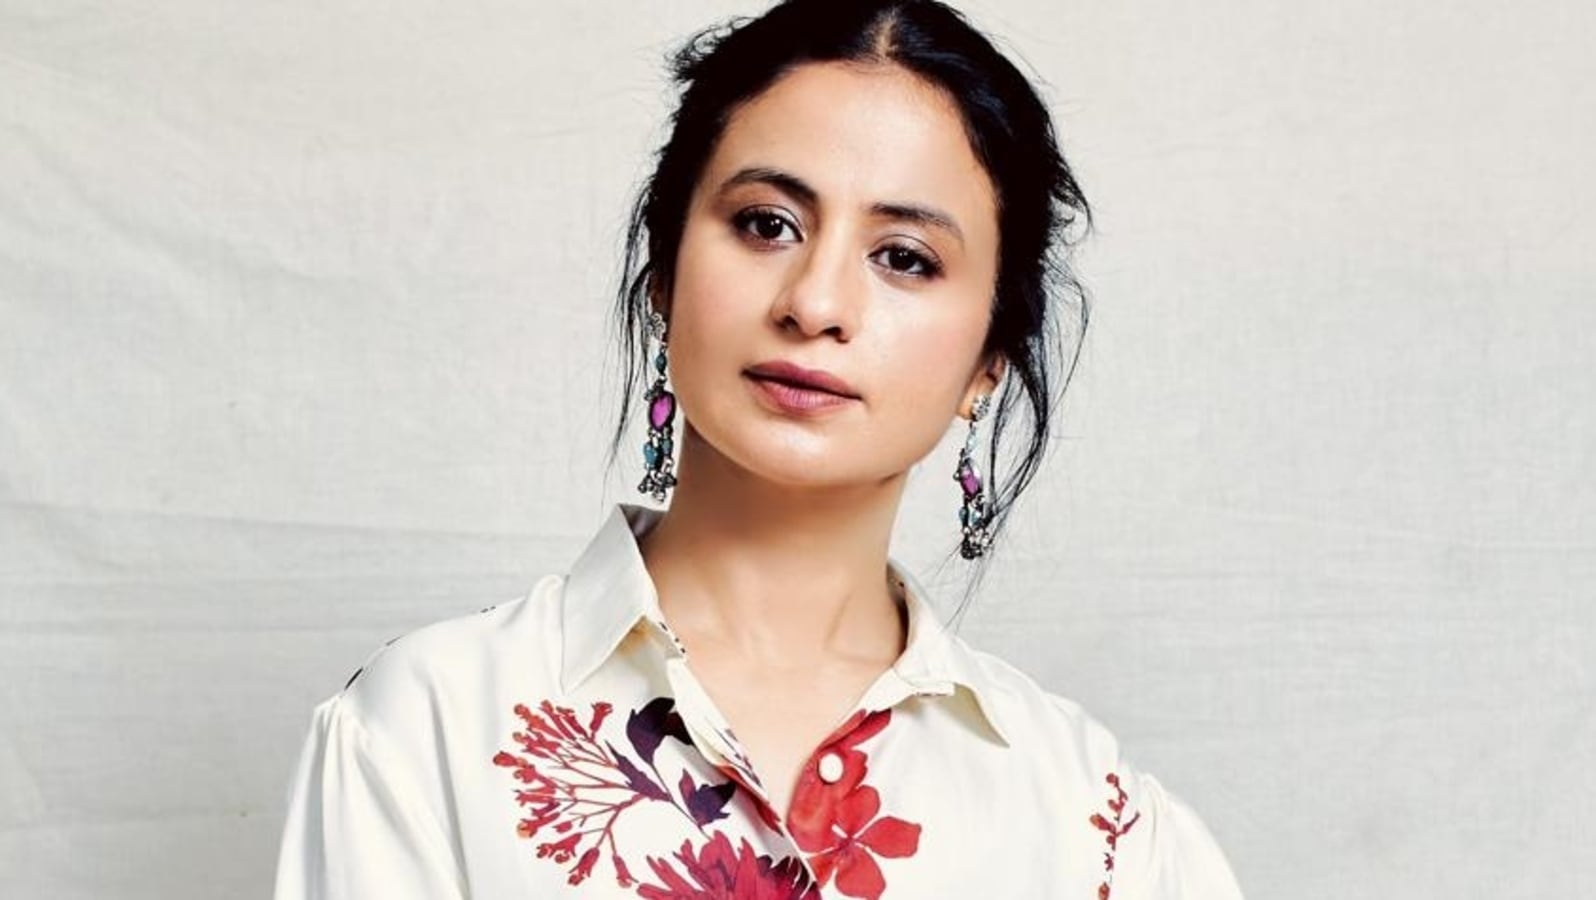 Rasika Dugal cried all night after watching her film Qissa: ‘I thought I did the worst job, I’ll never get work again’